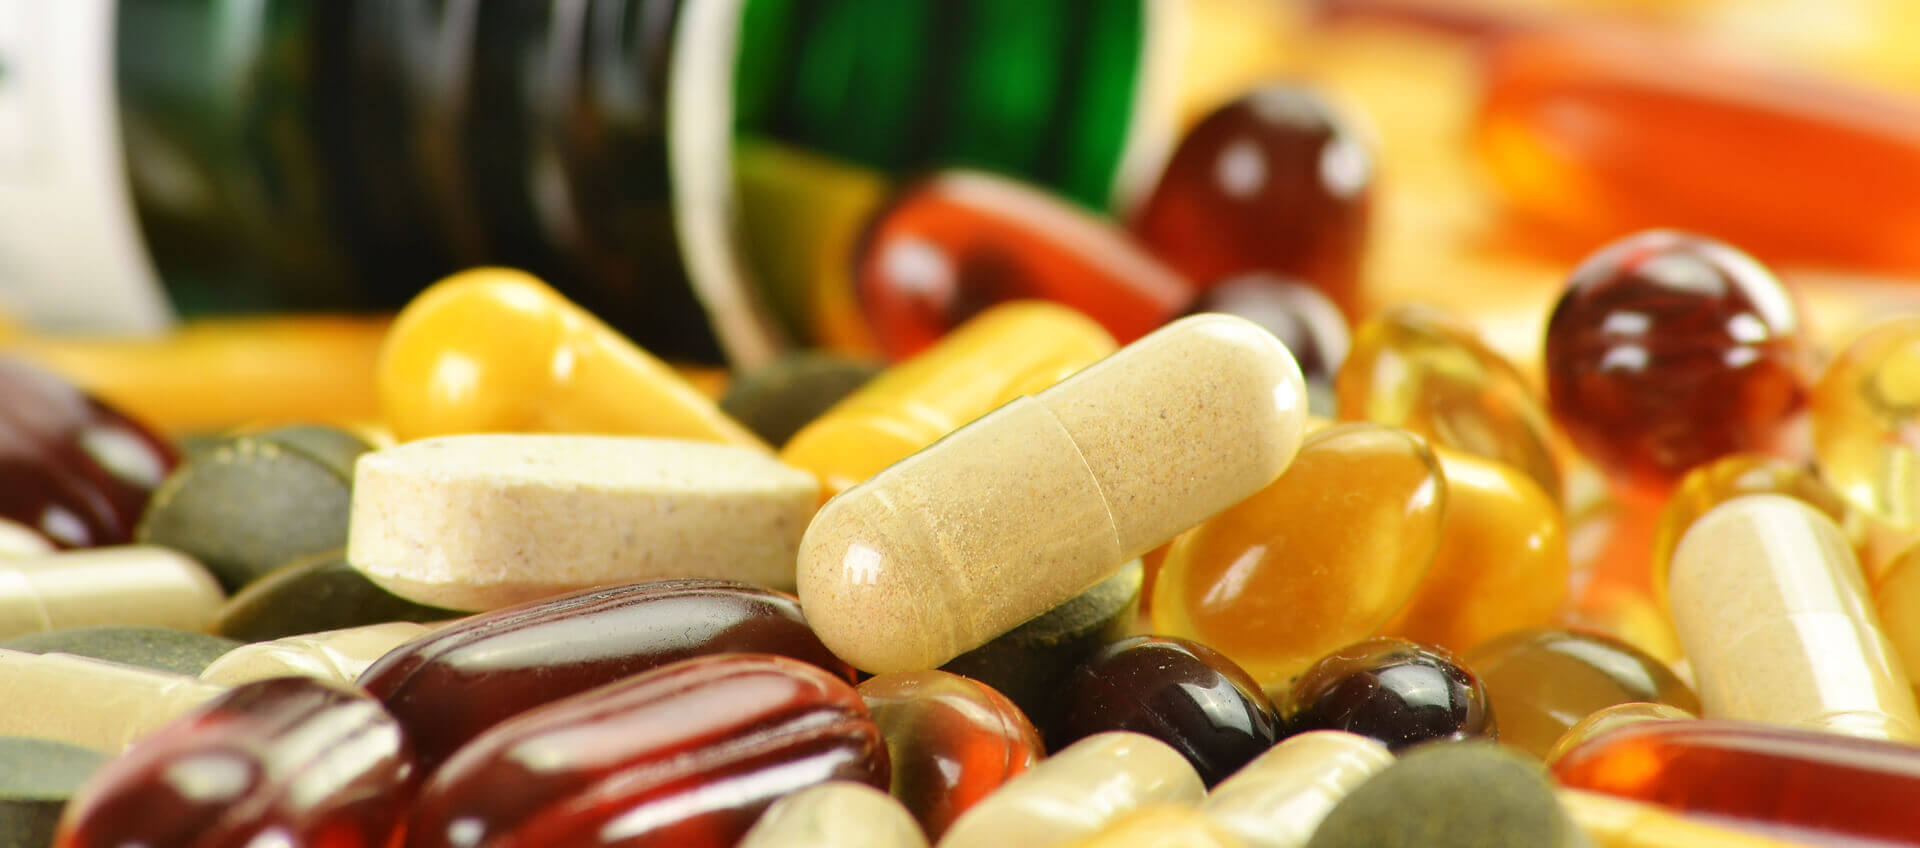 History of Dietary Supplements background image